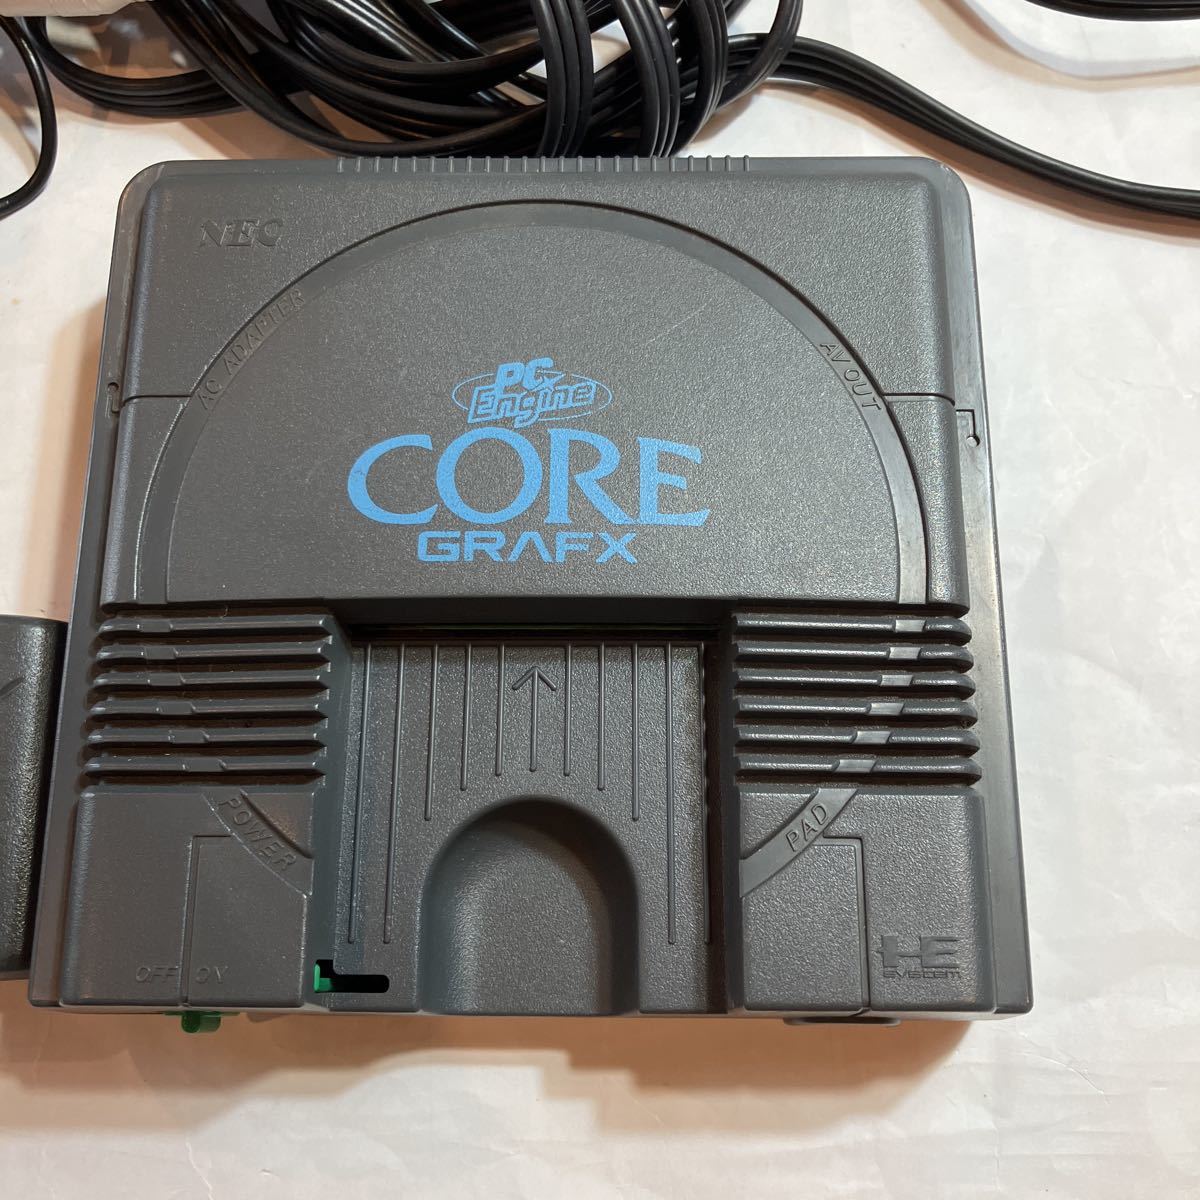 PC engine core graphics beautiful goods body, controller,AC adapter PAD-105,AV cable attaching operation verification settled 